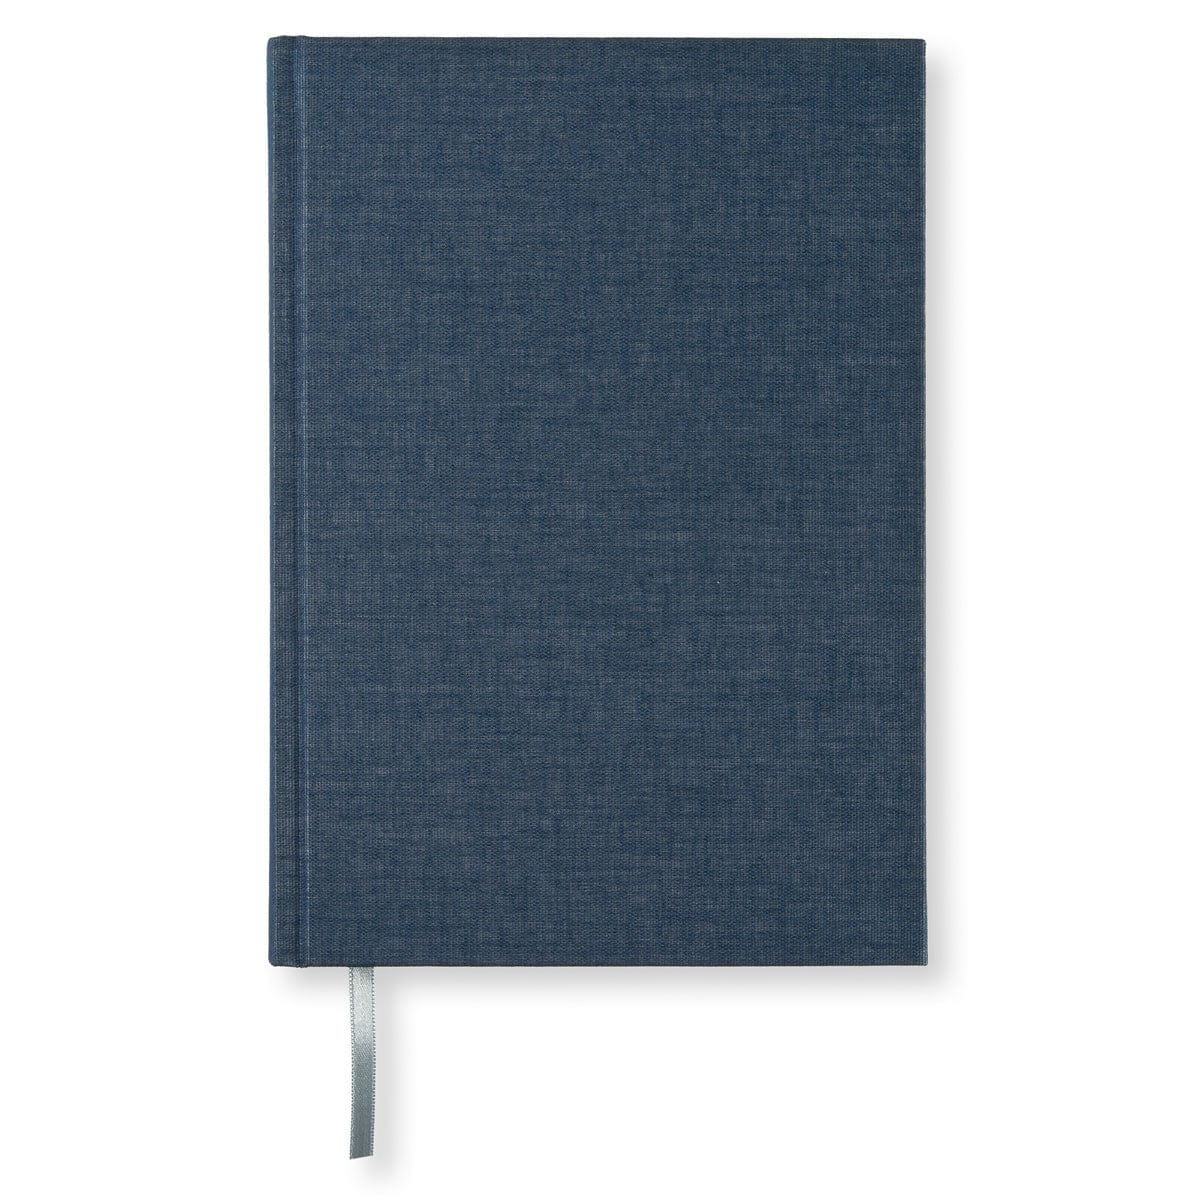 PaperStyle Paperstyle NOTEBOOK A5 256p. Ruled Dark Denim